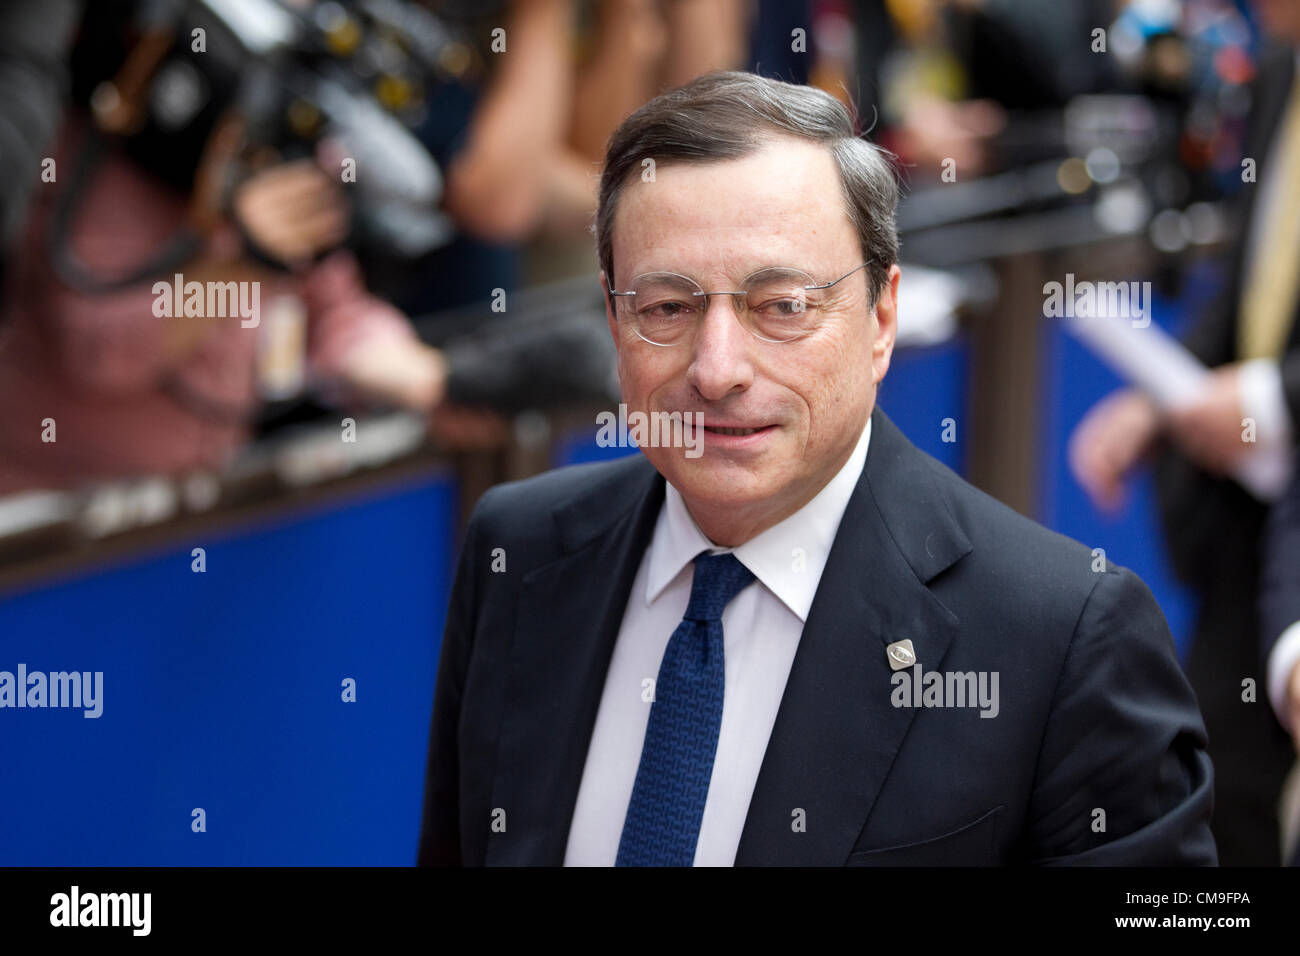 EU Summit, Justus Lipsius Building, Brussels Parliament, Belgium. 29.06.2012 Mario Draghi,  President of the European Central Bank, arrives at the European Union Summit 2nd Day in Brussels, Belgium. Stock Photo